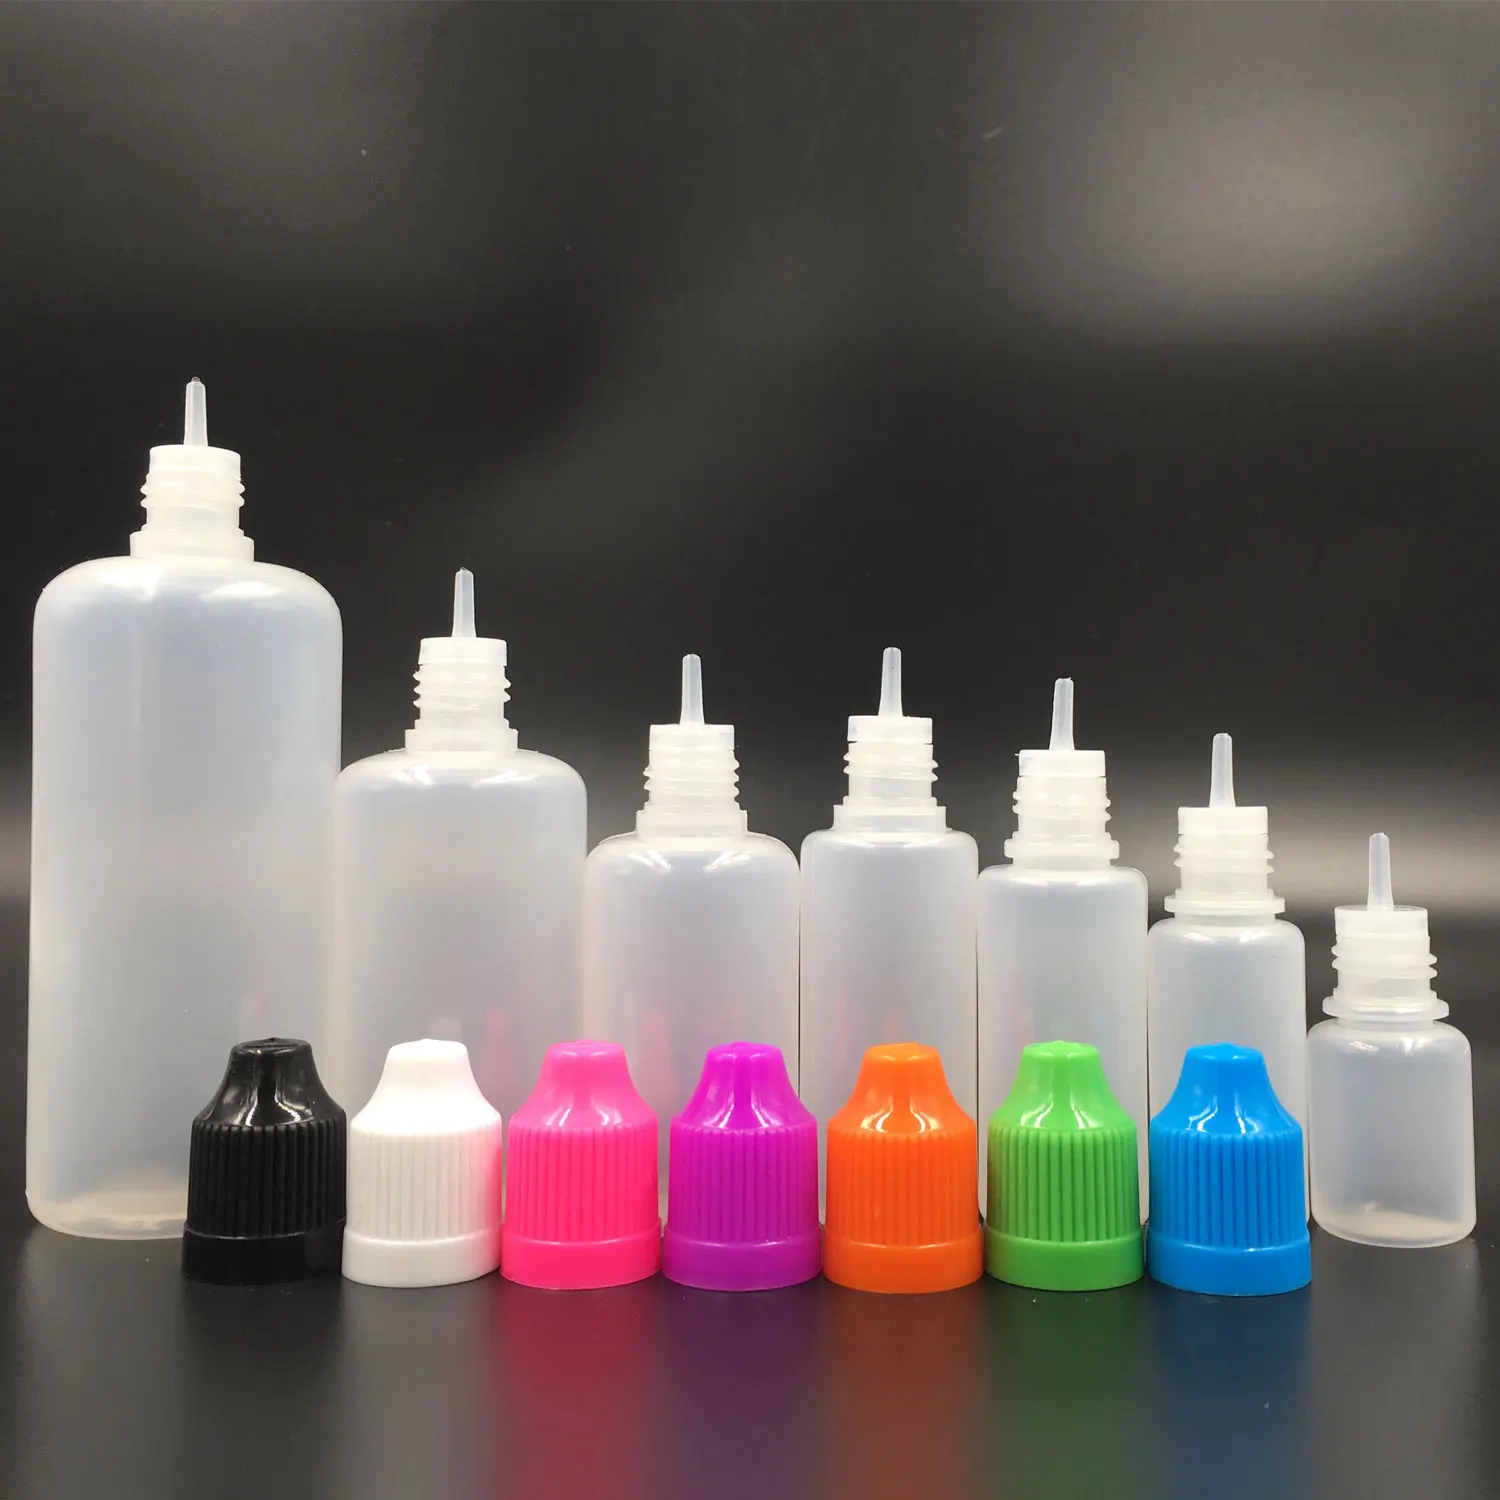 10pcs 5ml-120ml Empty Soft LDPE Dropper Bottles Plastic Containers for E Liquid Vape Bottle with Mixed Caps Lid Plugs